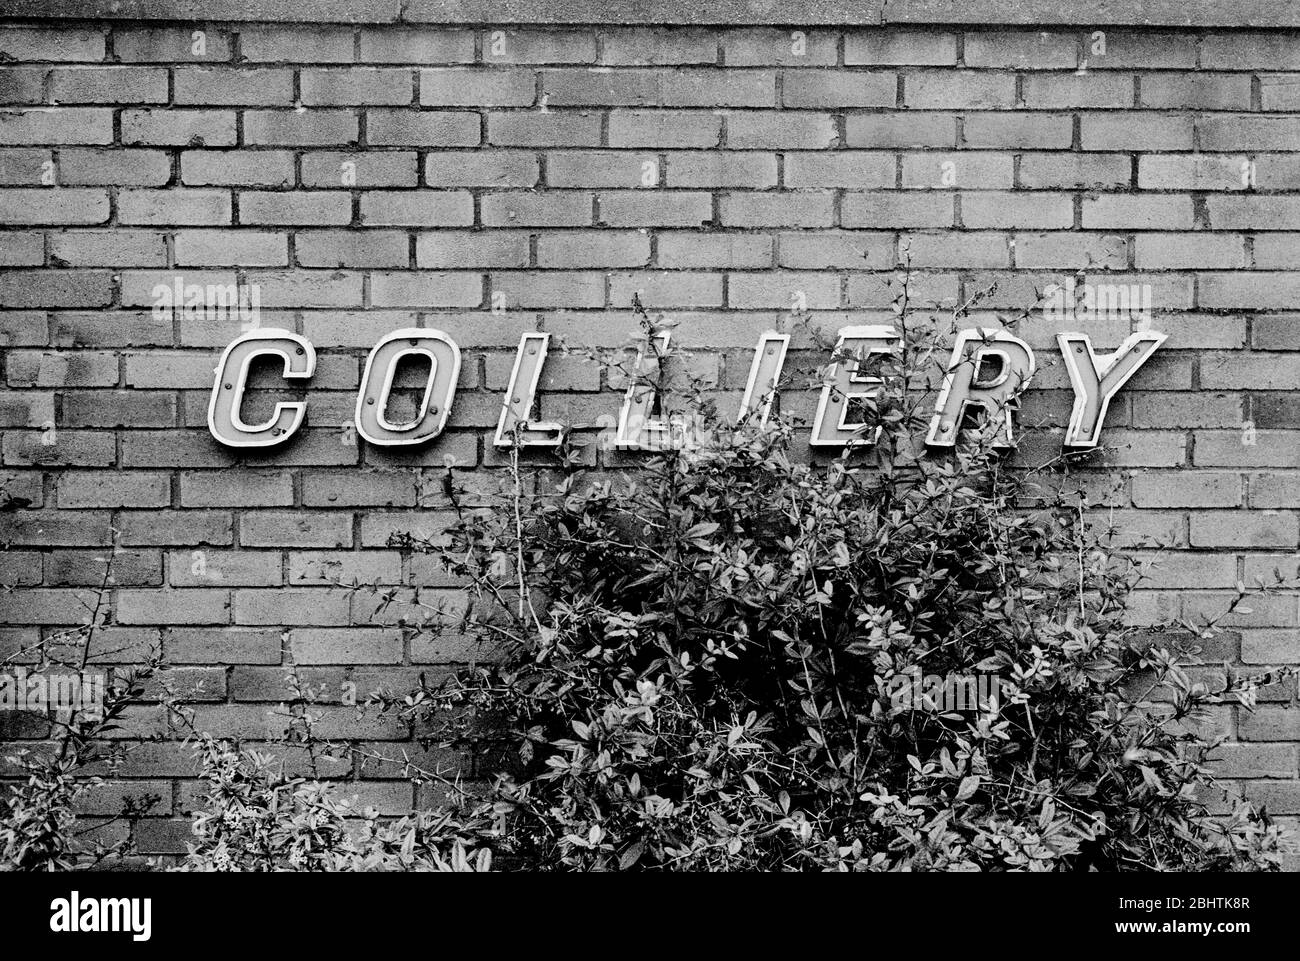 Colliery sign at Trentham Colliery, UK Stock Photo